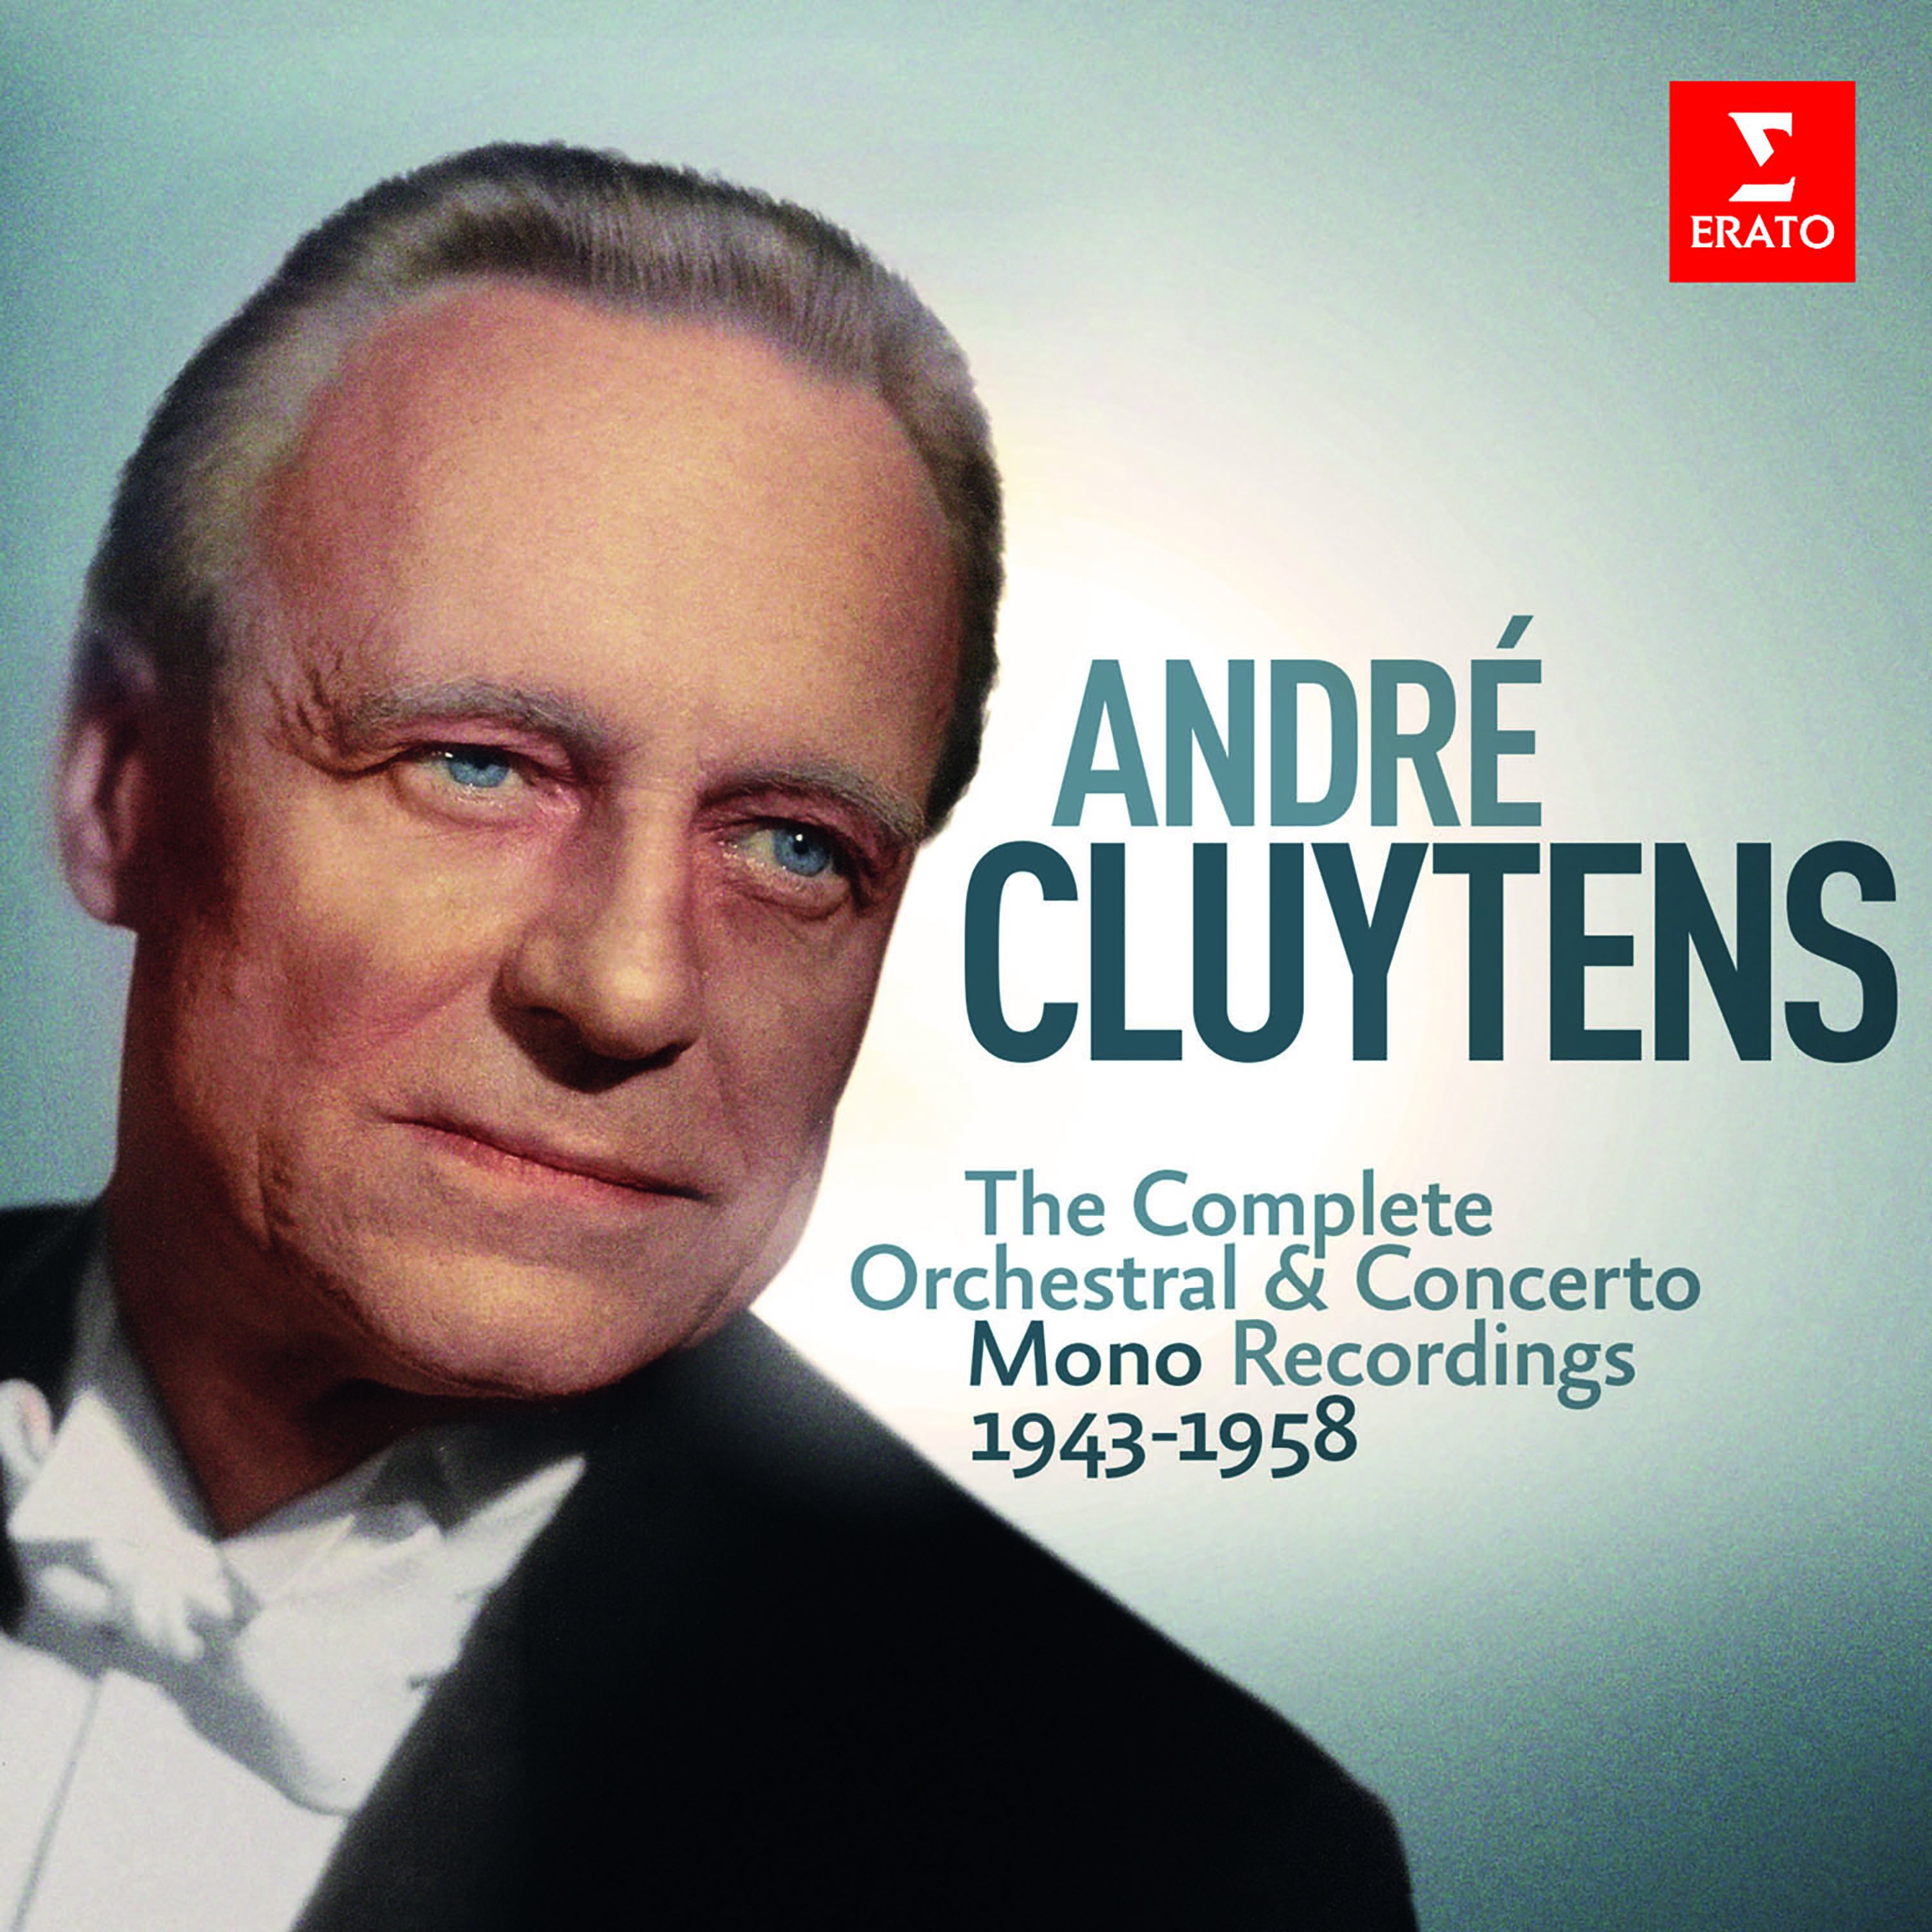 Andre Cluytens  Complete Mono Orchestral Recordings, 19431958